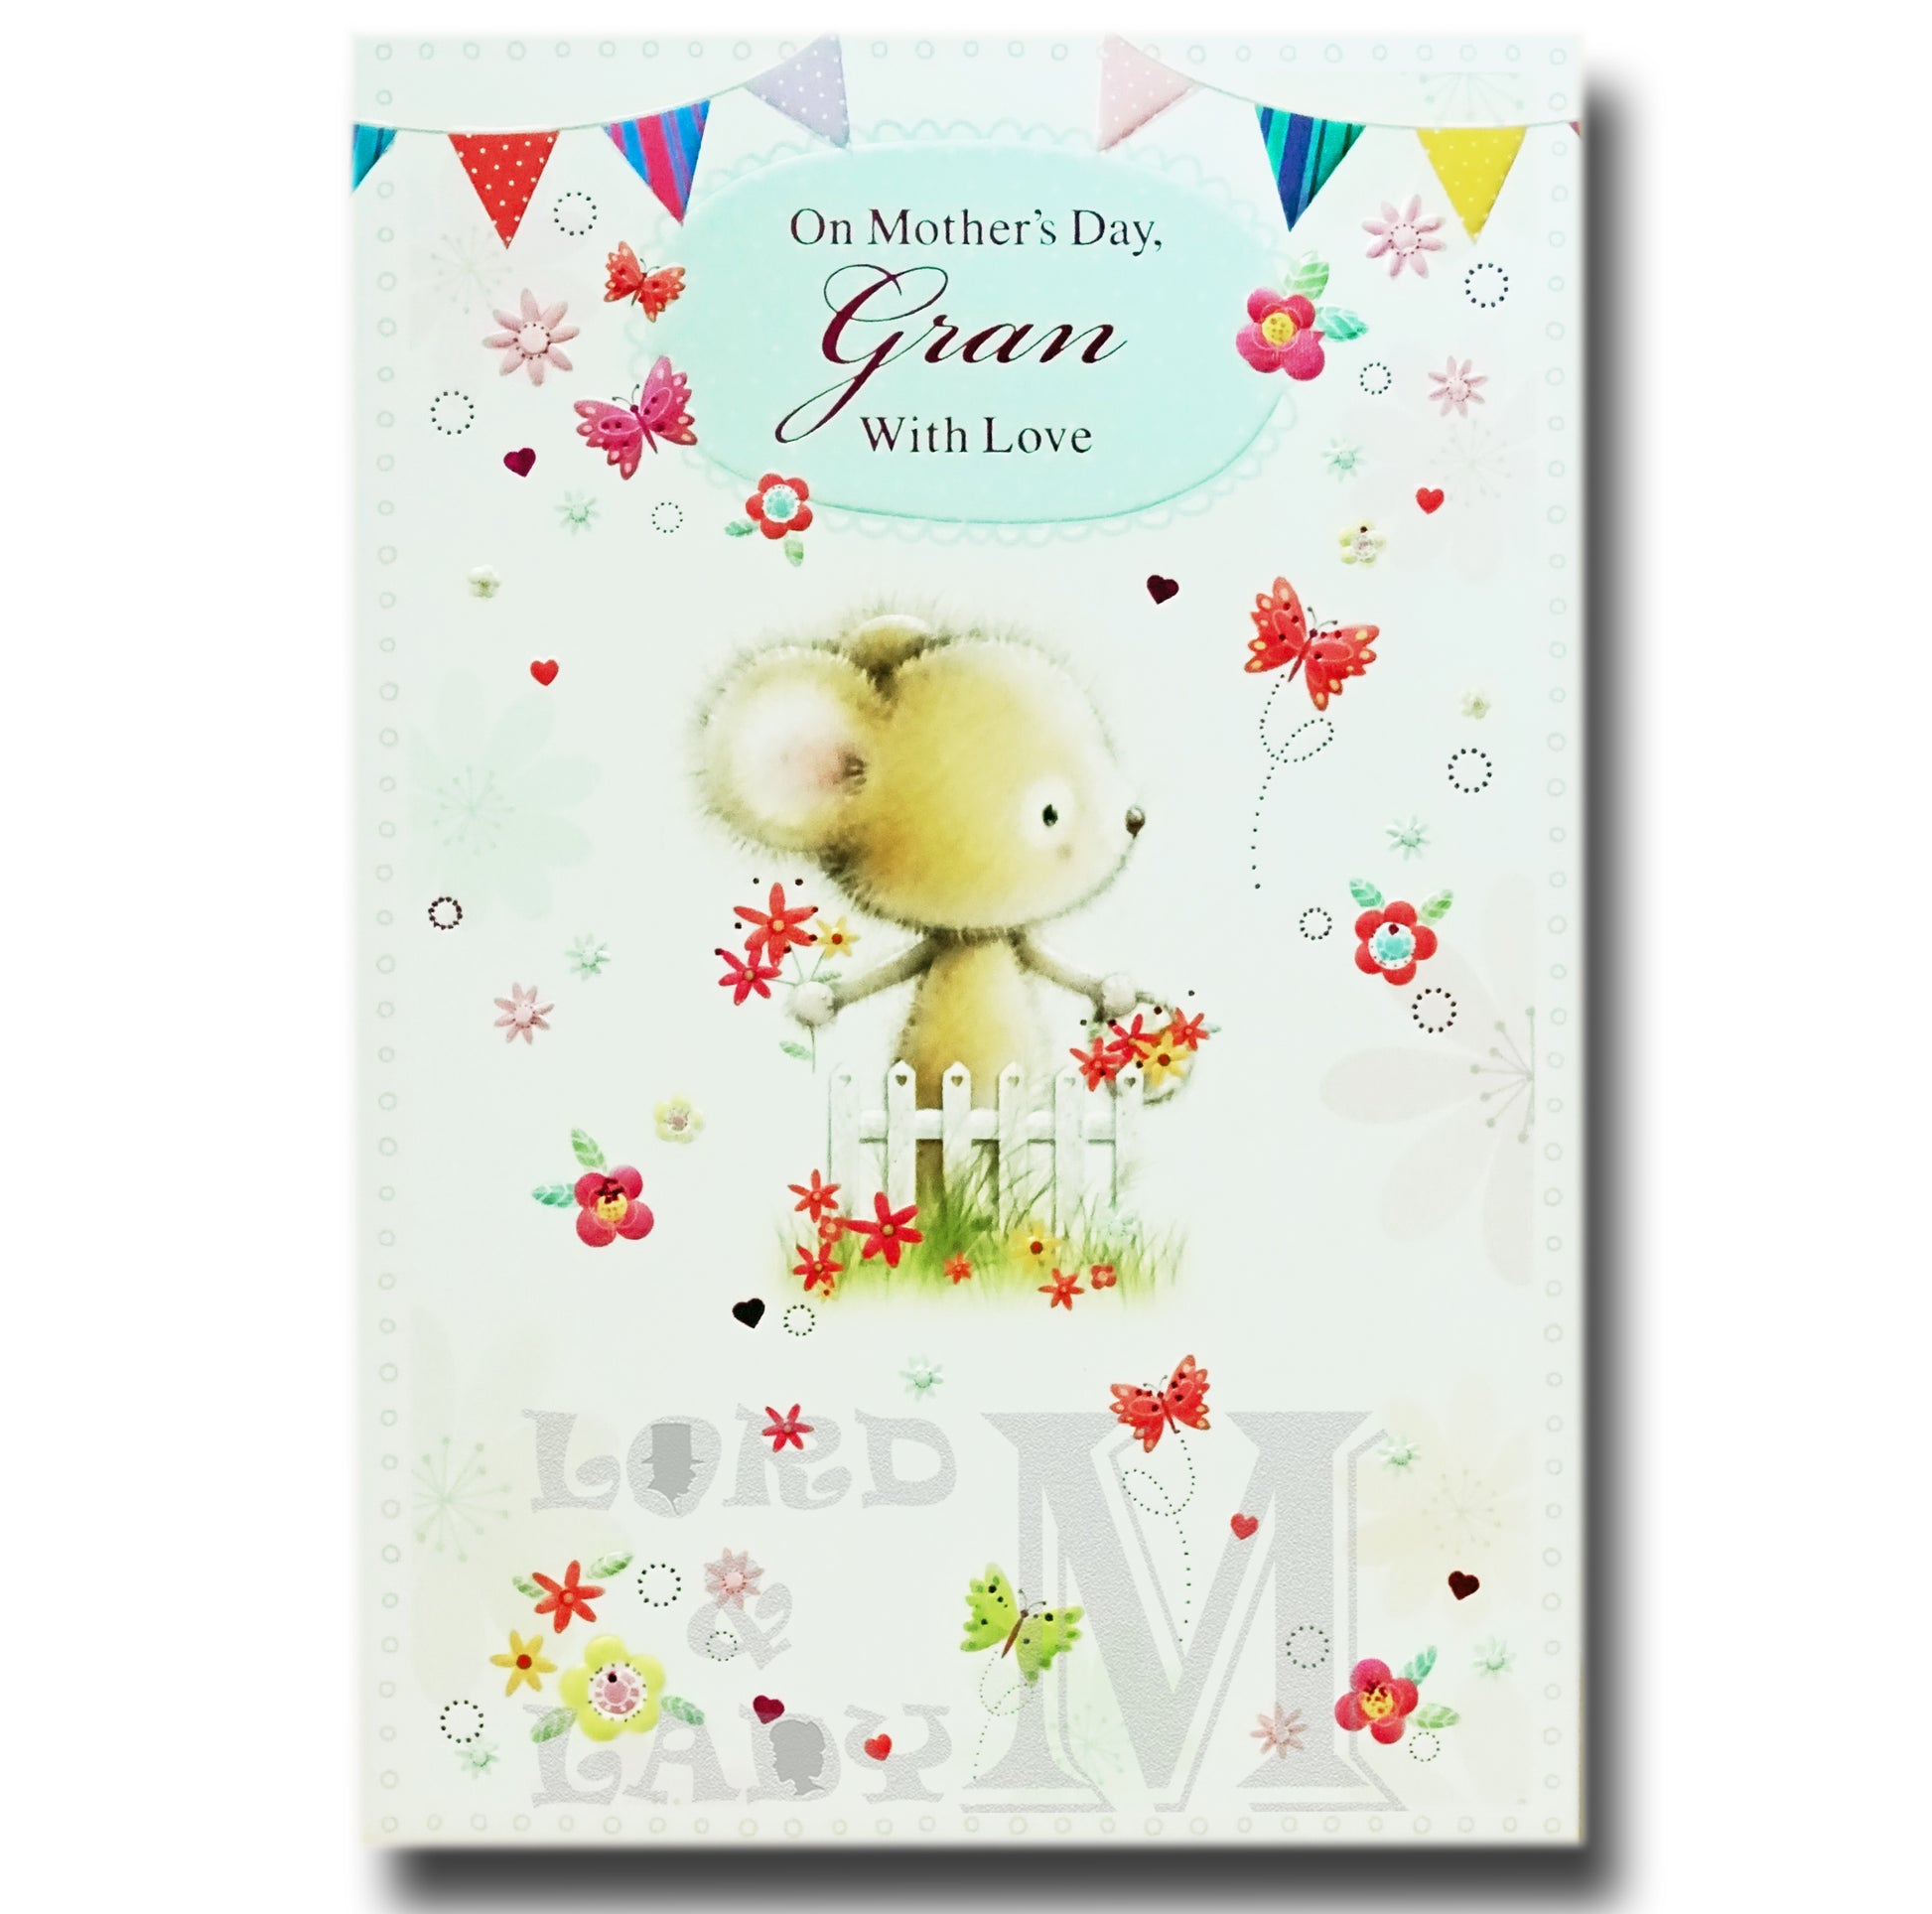 20cm - On Mother's Day, Gran With Love - GH